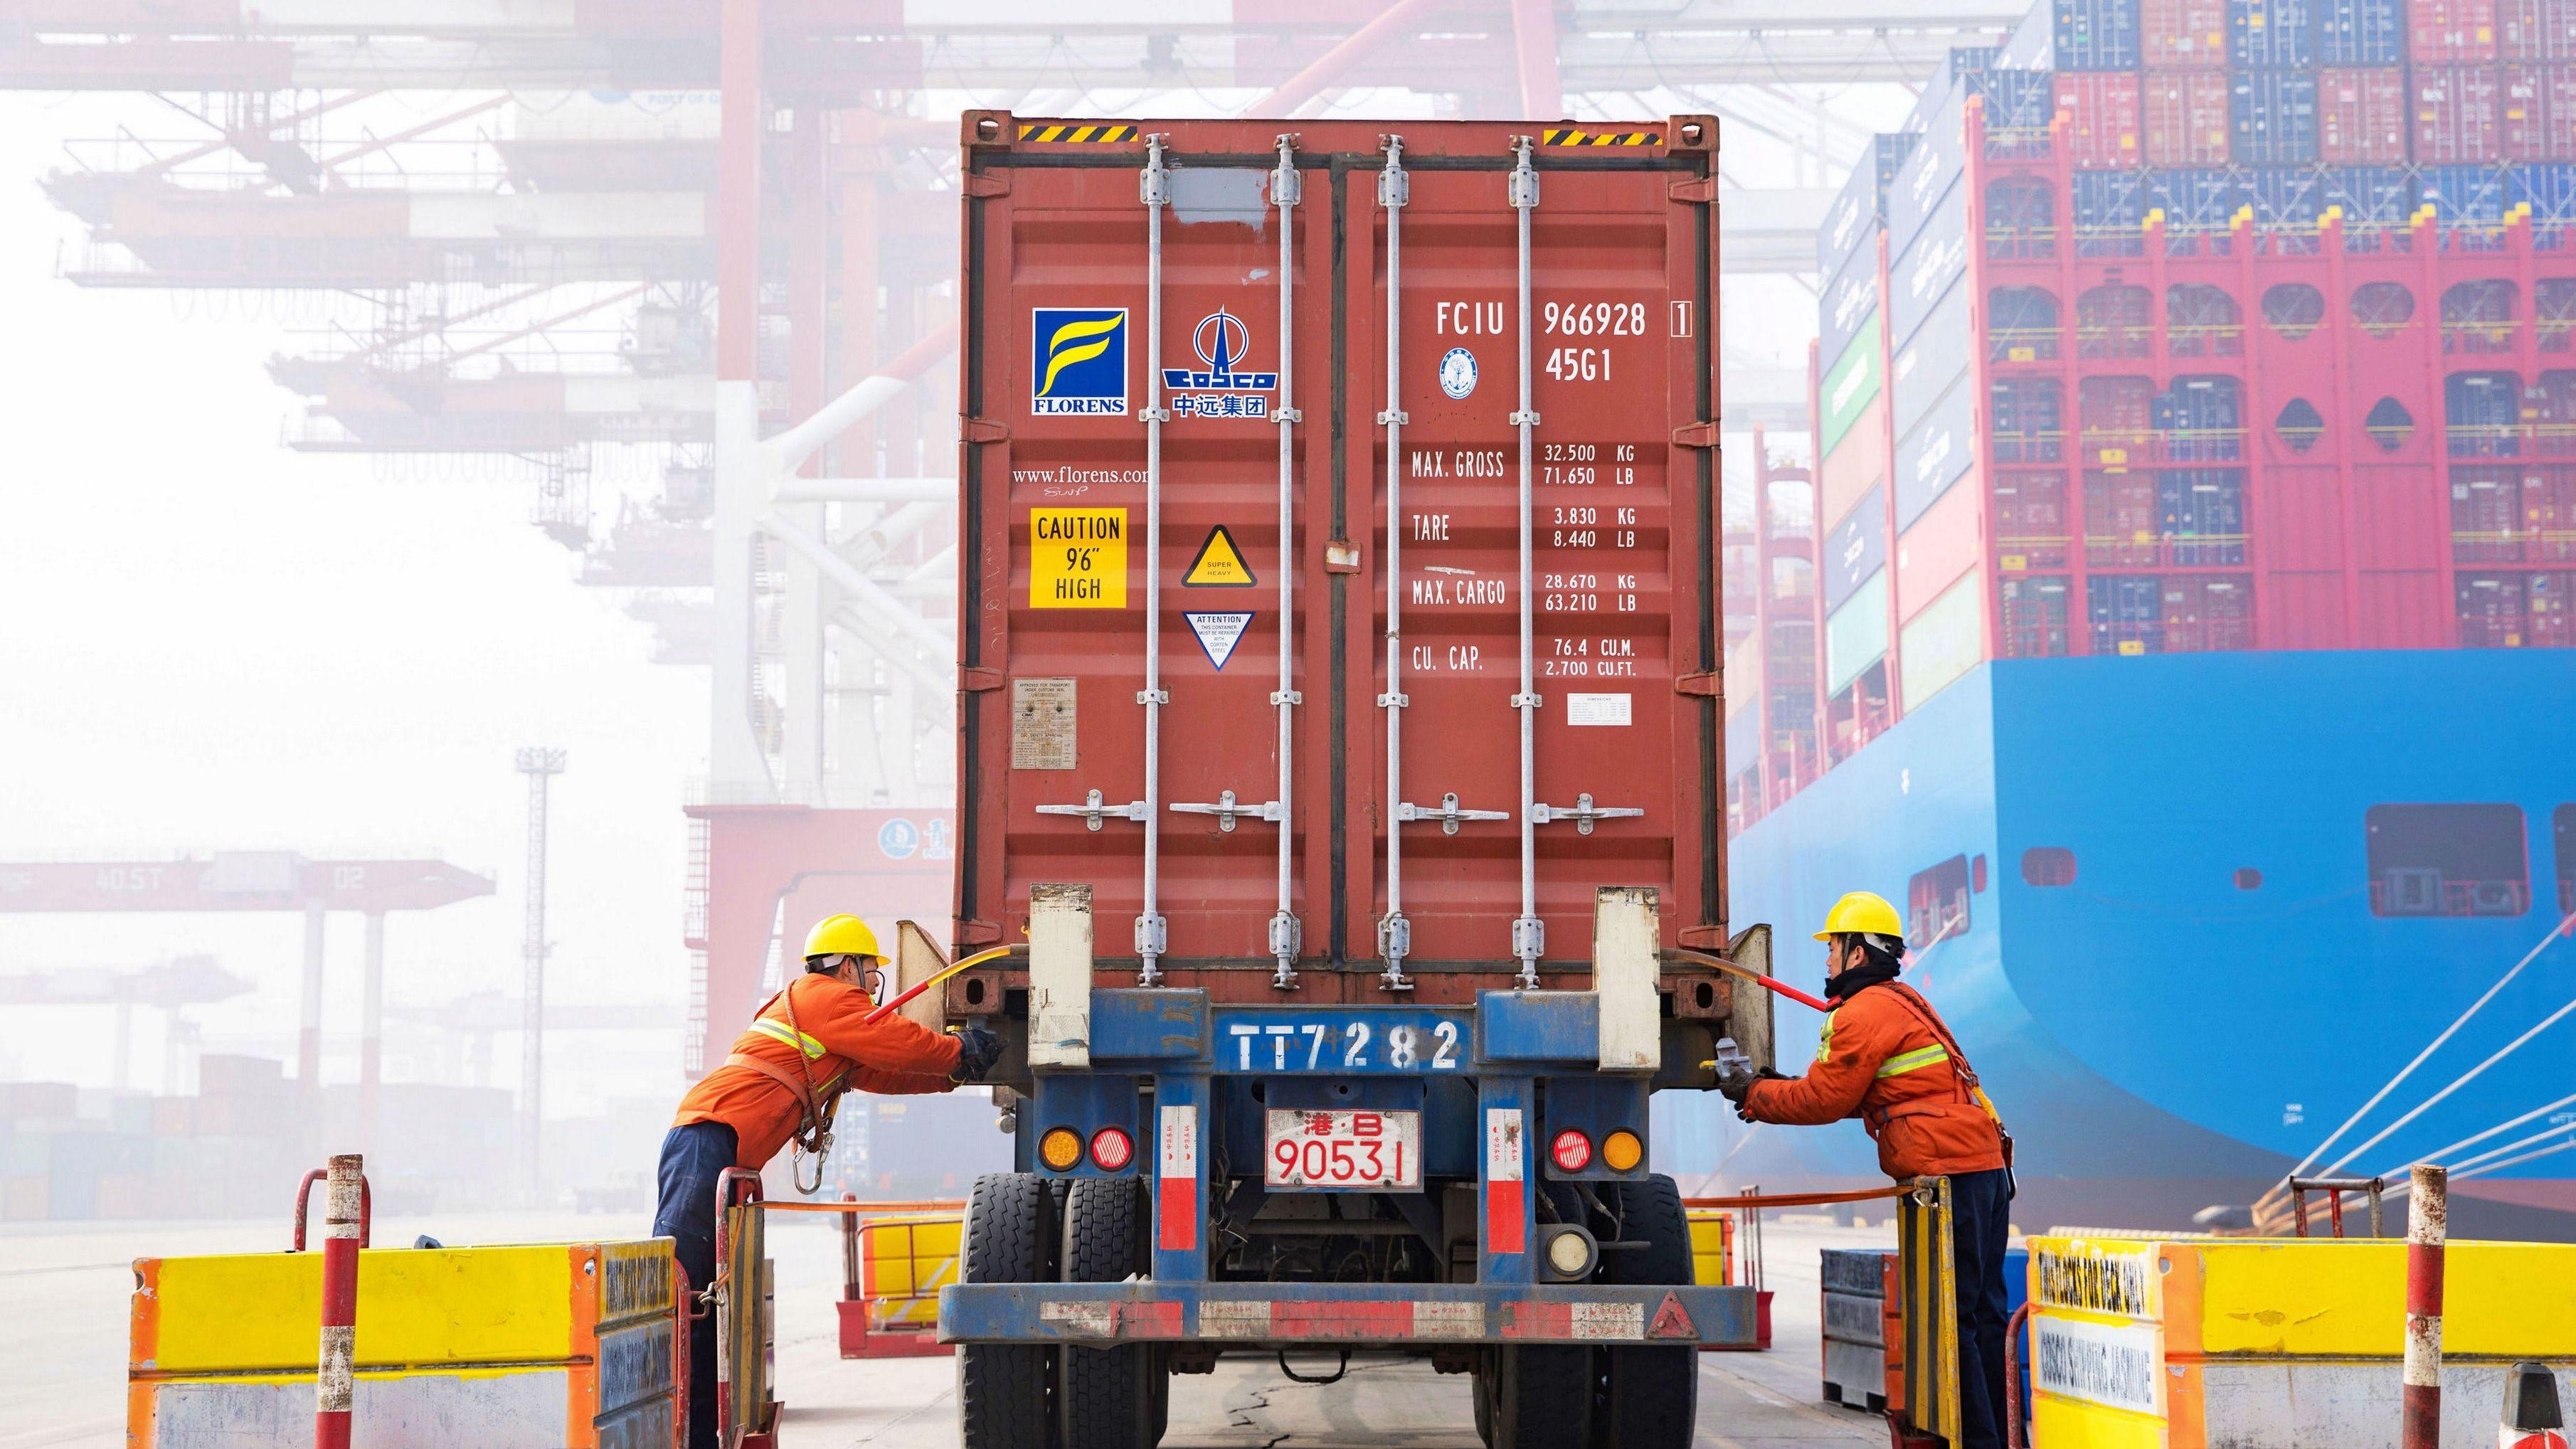 Workers prepare a container at the port in Qingdao, China's eastern Shandong province, on Jan. 14, 2019.